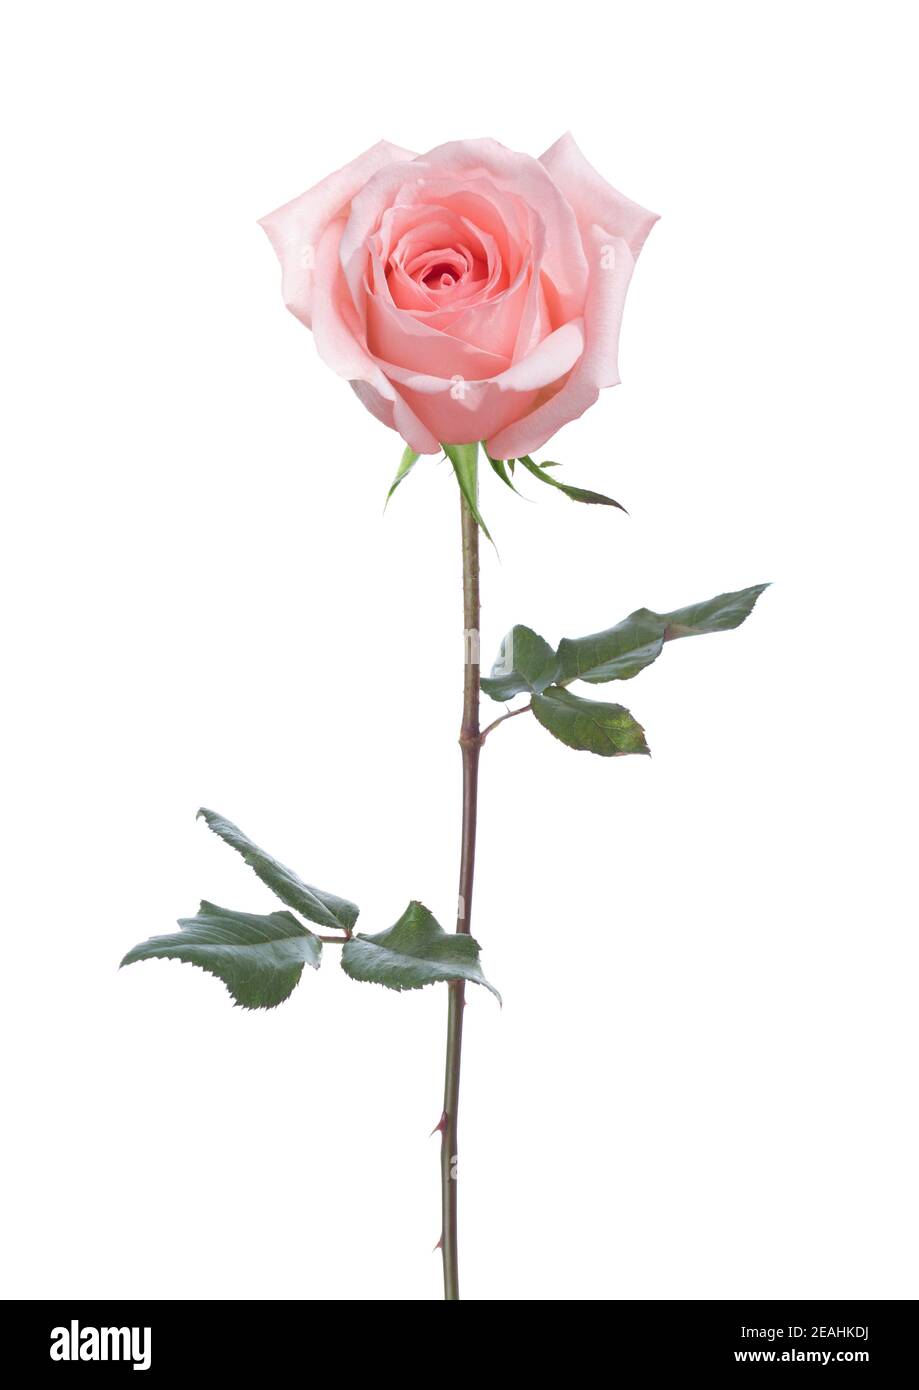 Light pink  Rose with green leaves  isolated on white background. Stock Photo